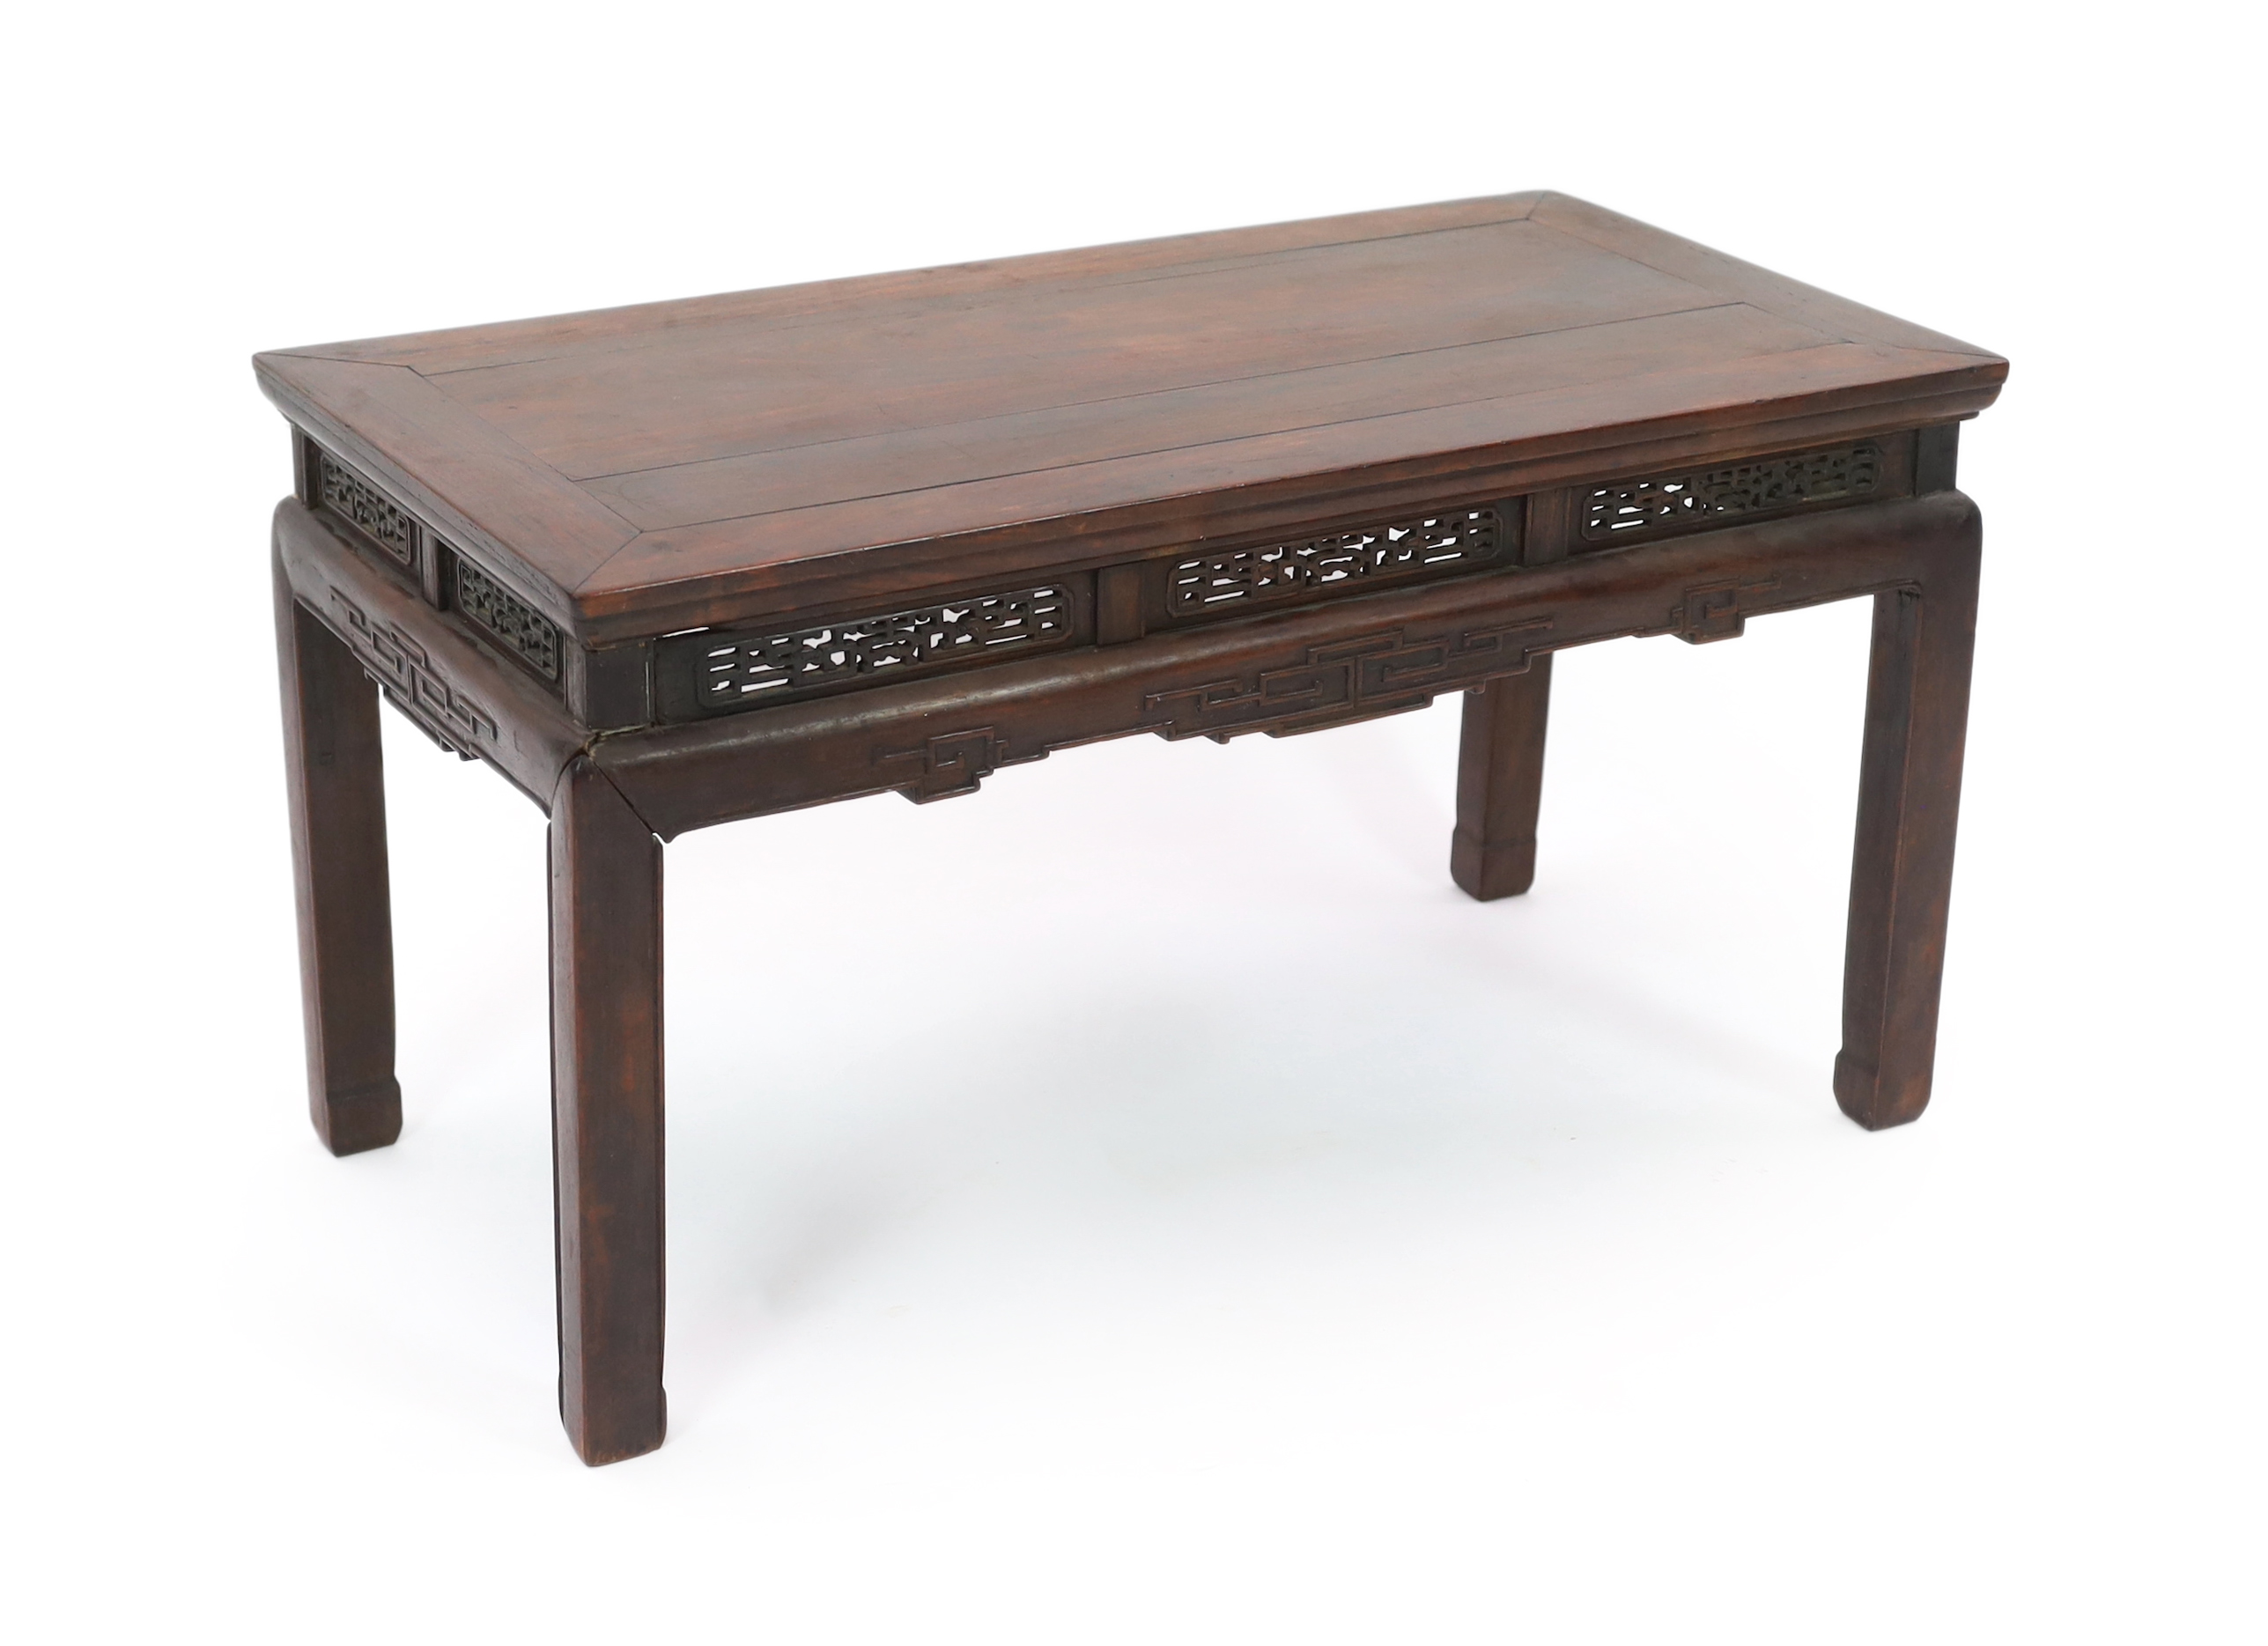 A Chinese huanghuali and hongmu low stand, 19th century                                                                                                                                                                     